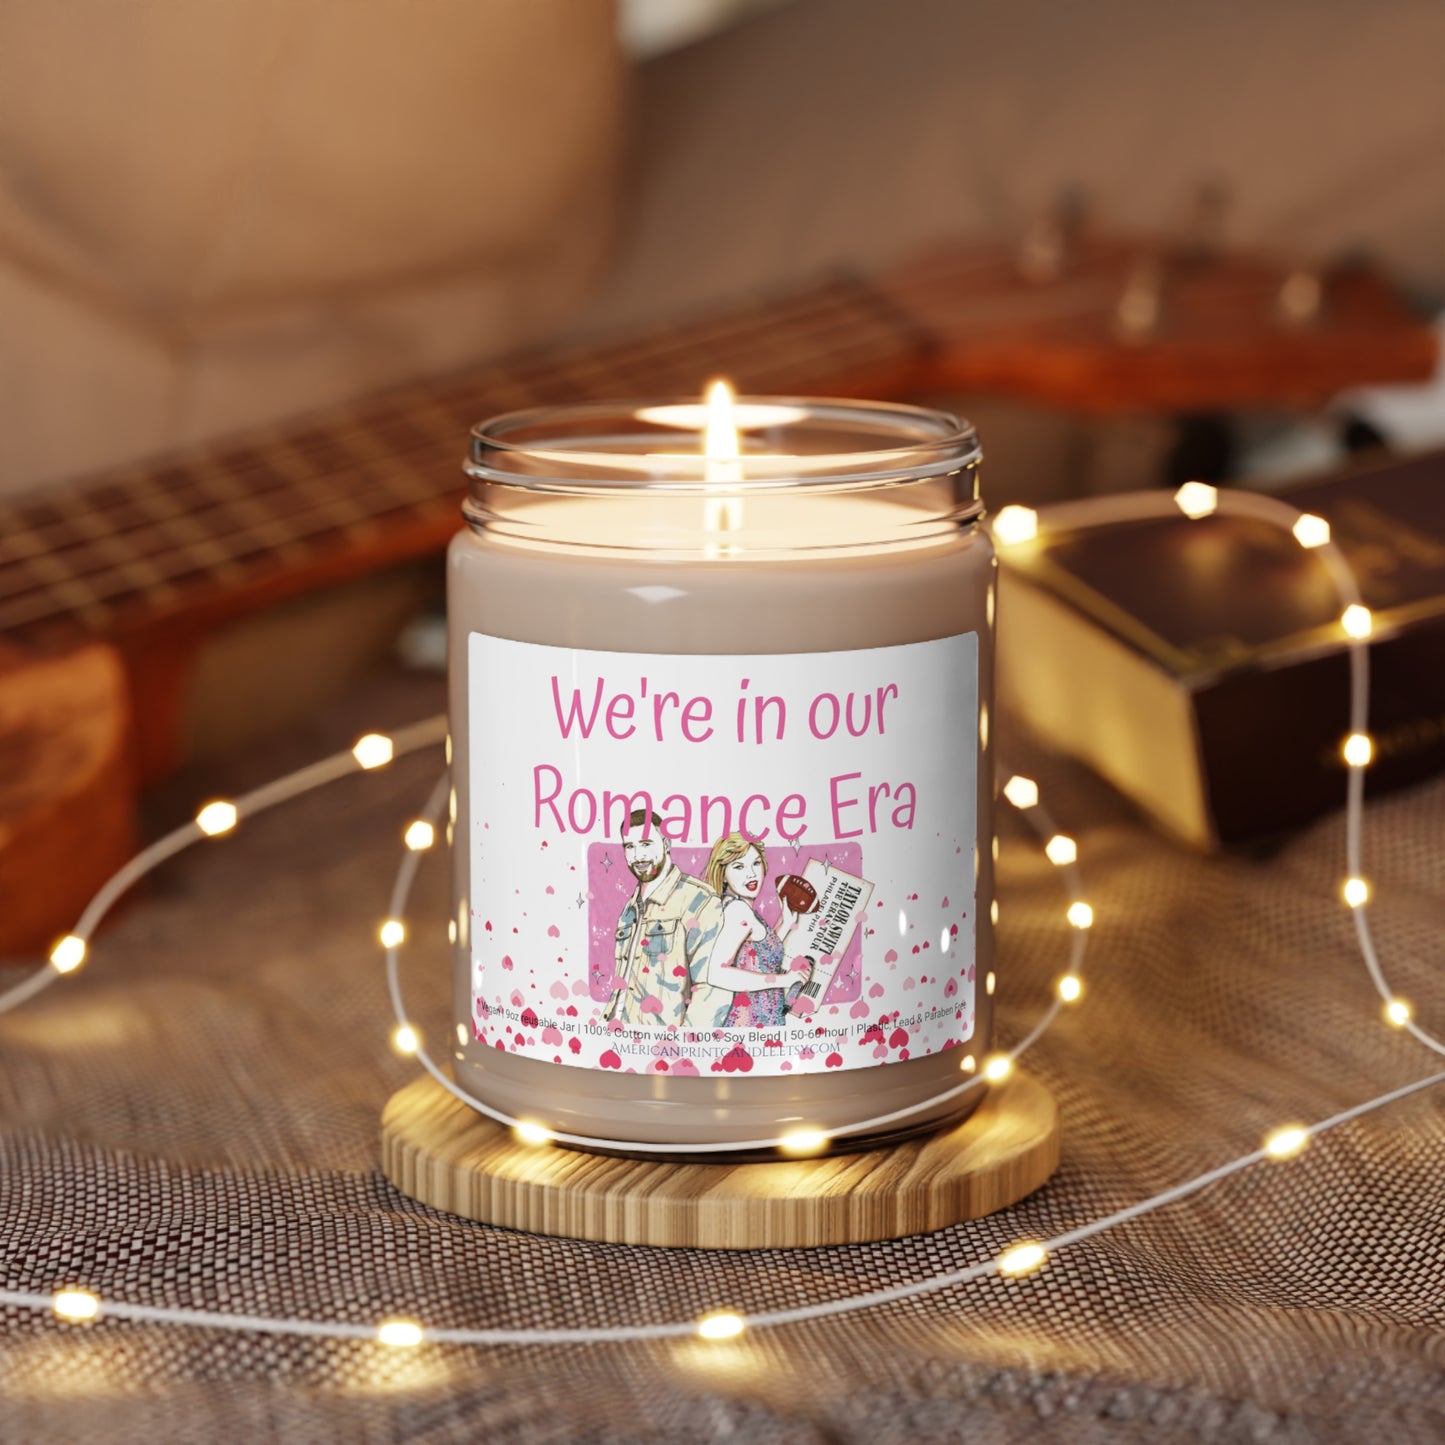 We're in our Romance Era Taylor Travis Gift Scented Soy Candle 9oz